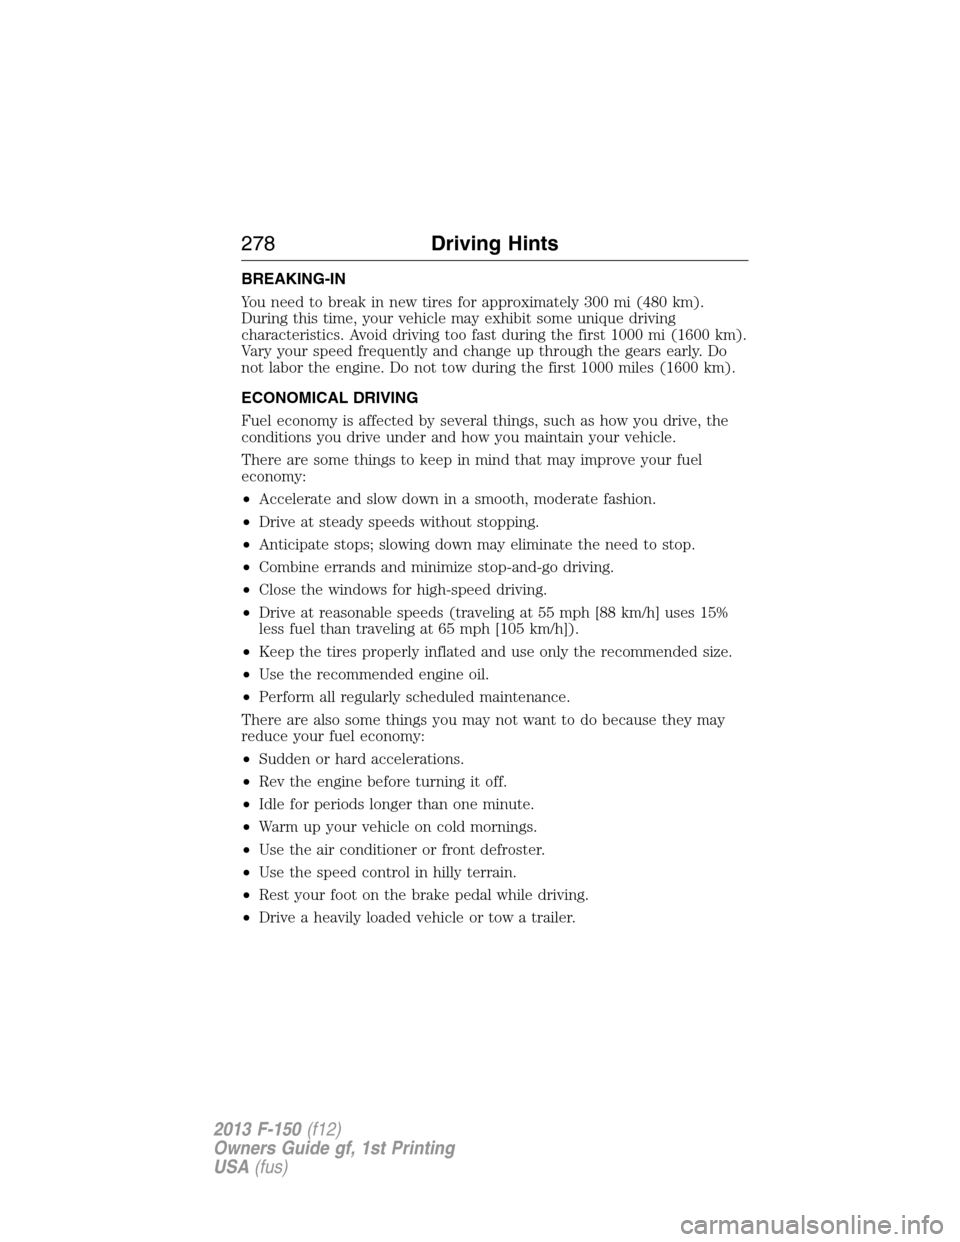 FORD F150 2013 12.G Owners Manual BREAKING-IN
You need to break in new tires for approximately 300 mi (480 km).
During this time, your vehicle may exhibit some unique driving
characteristics. Avoid driving too fast during the first 10